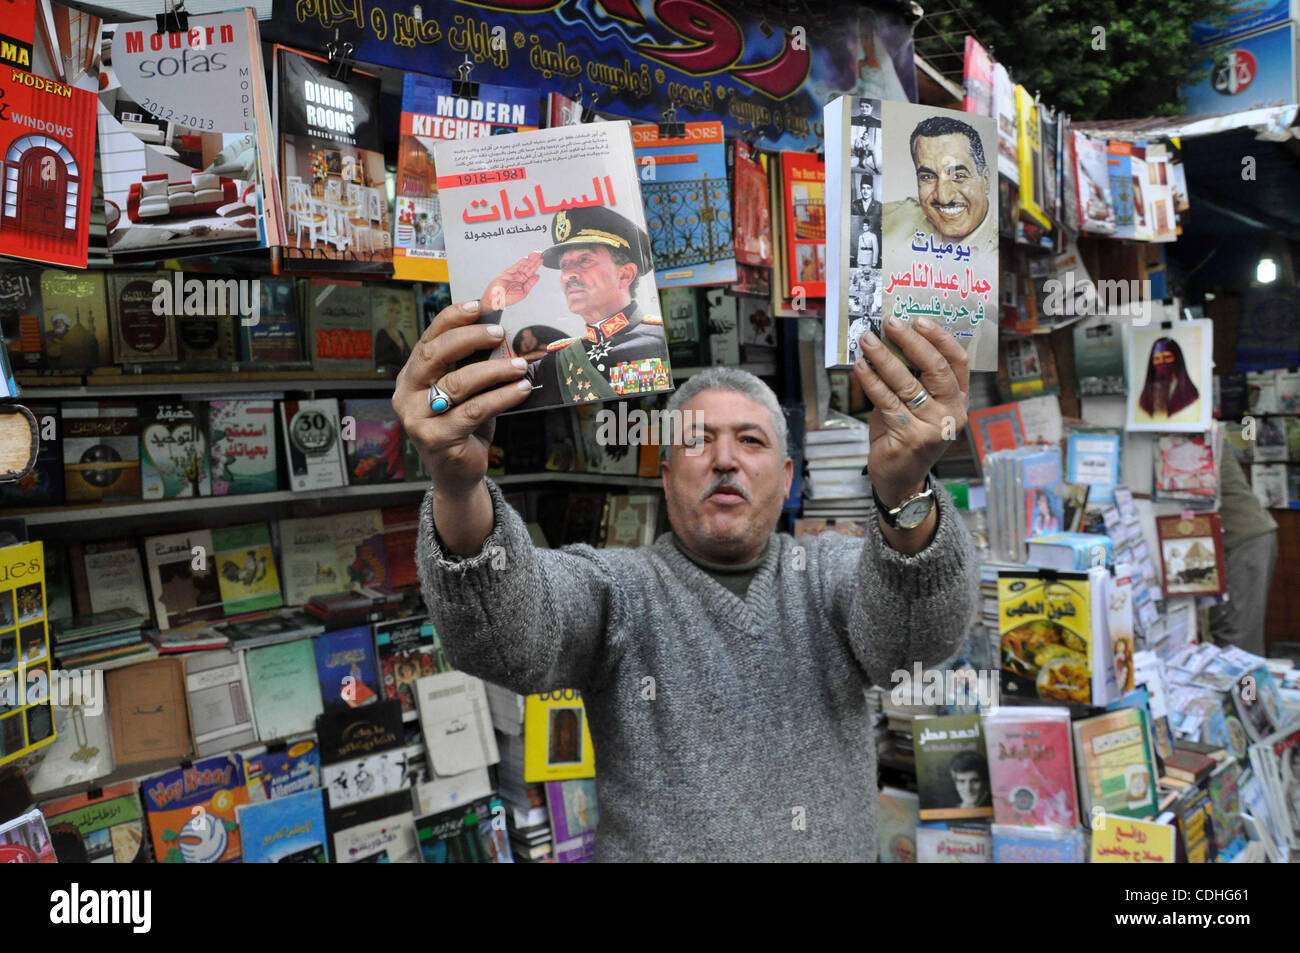 Egyptian man holds books for former Egyptian presidents Jamal Abed Al-Nasser and Anwar Al-Saddat at his bookshop in Alexandria, Egypt, 06 February 2011. Anti-government protests entered its 13th straight day in Egypt, as solutions were being mulled to bring about a power shift to end the country's p Stock Photo